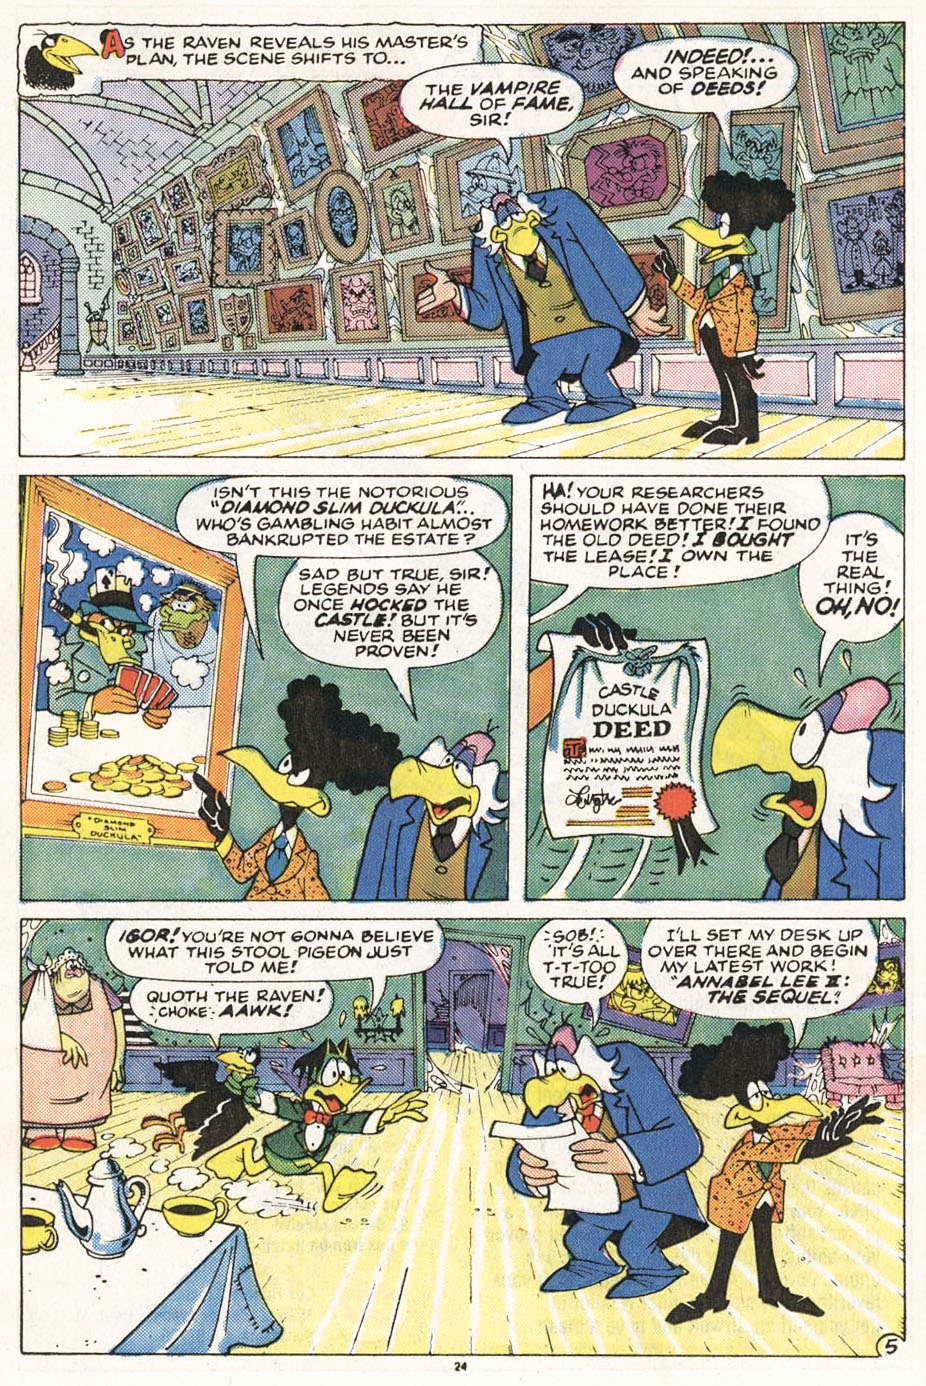 Read online Count Duckula comic -  Issue #2 - 26